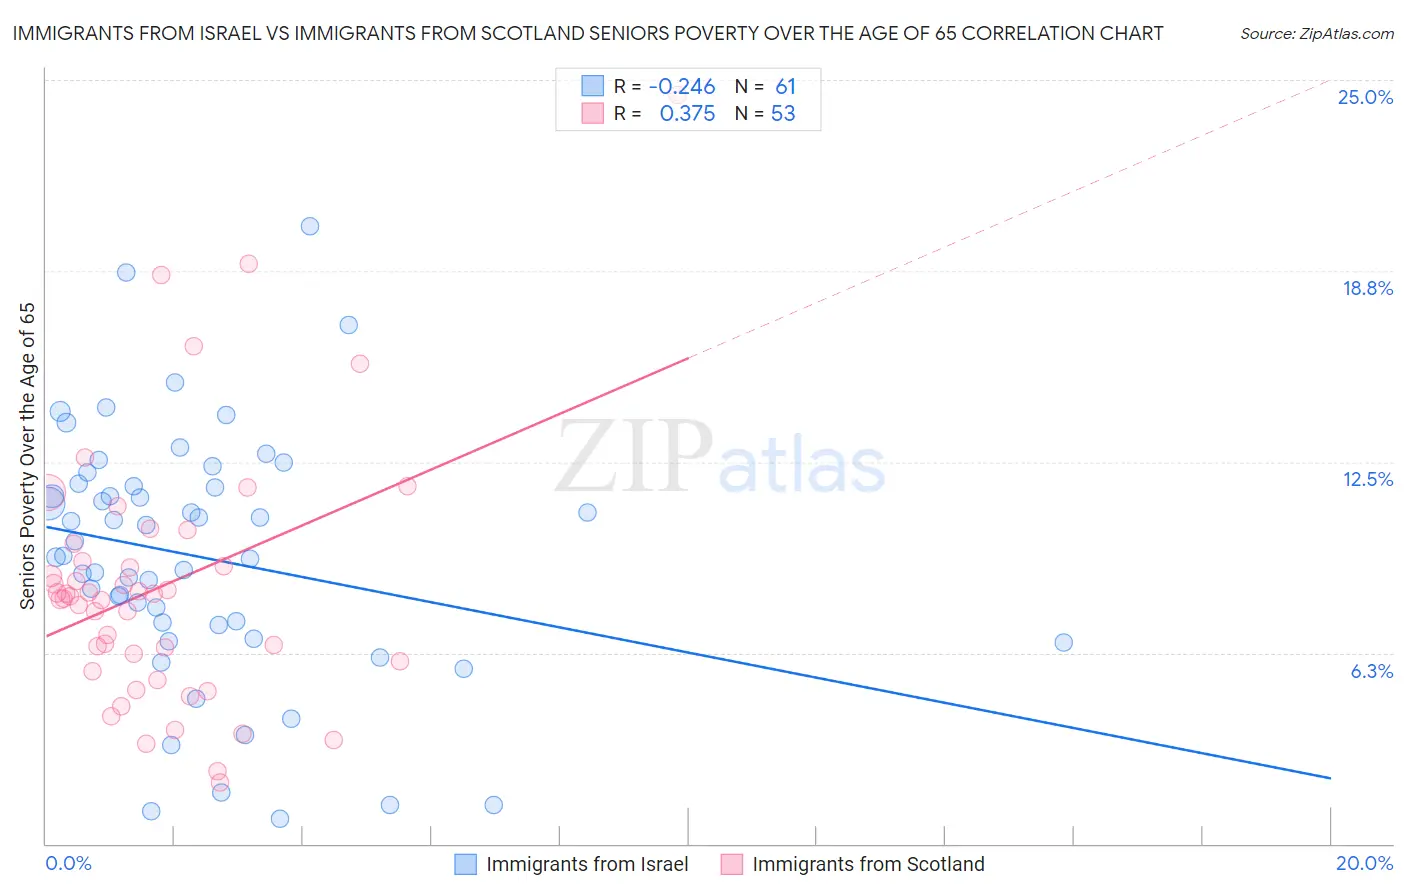 Immigrants from Israel vs Immigrants from Scotland Seniors Poverty Over the Age of 65